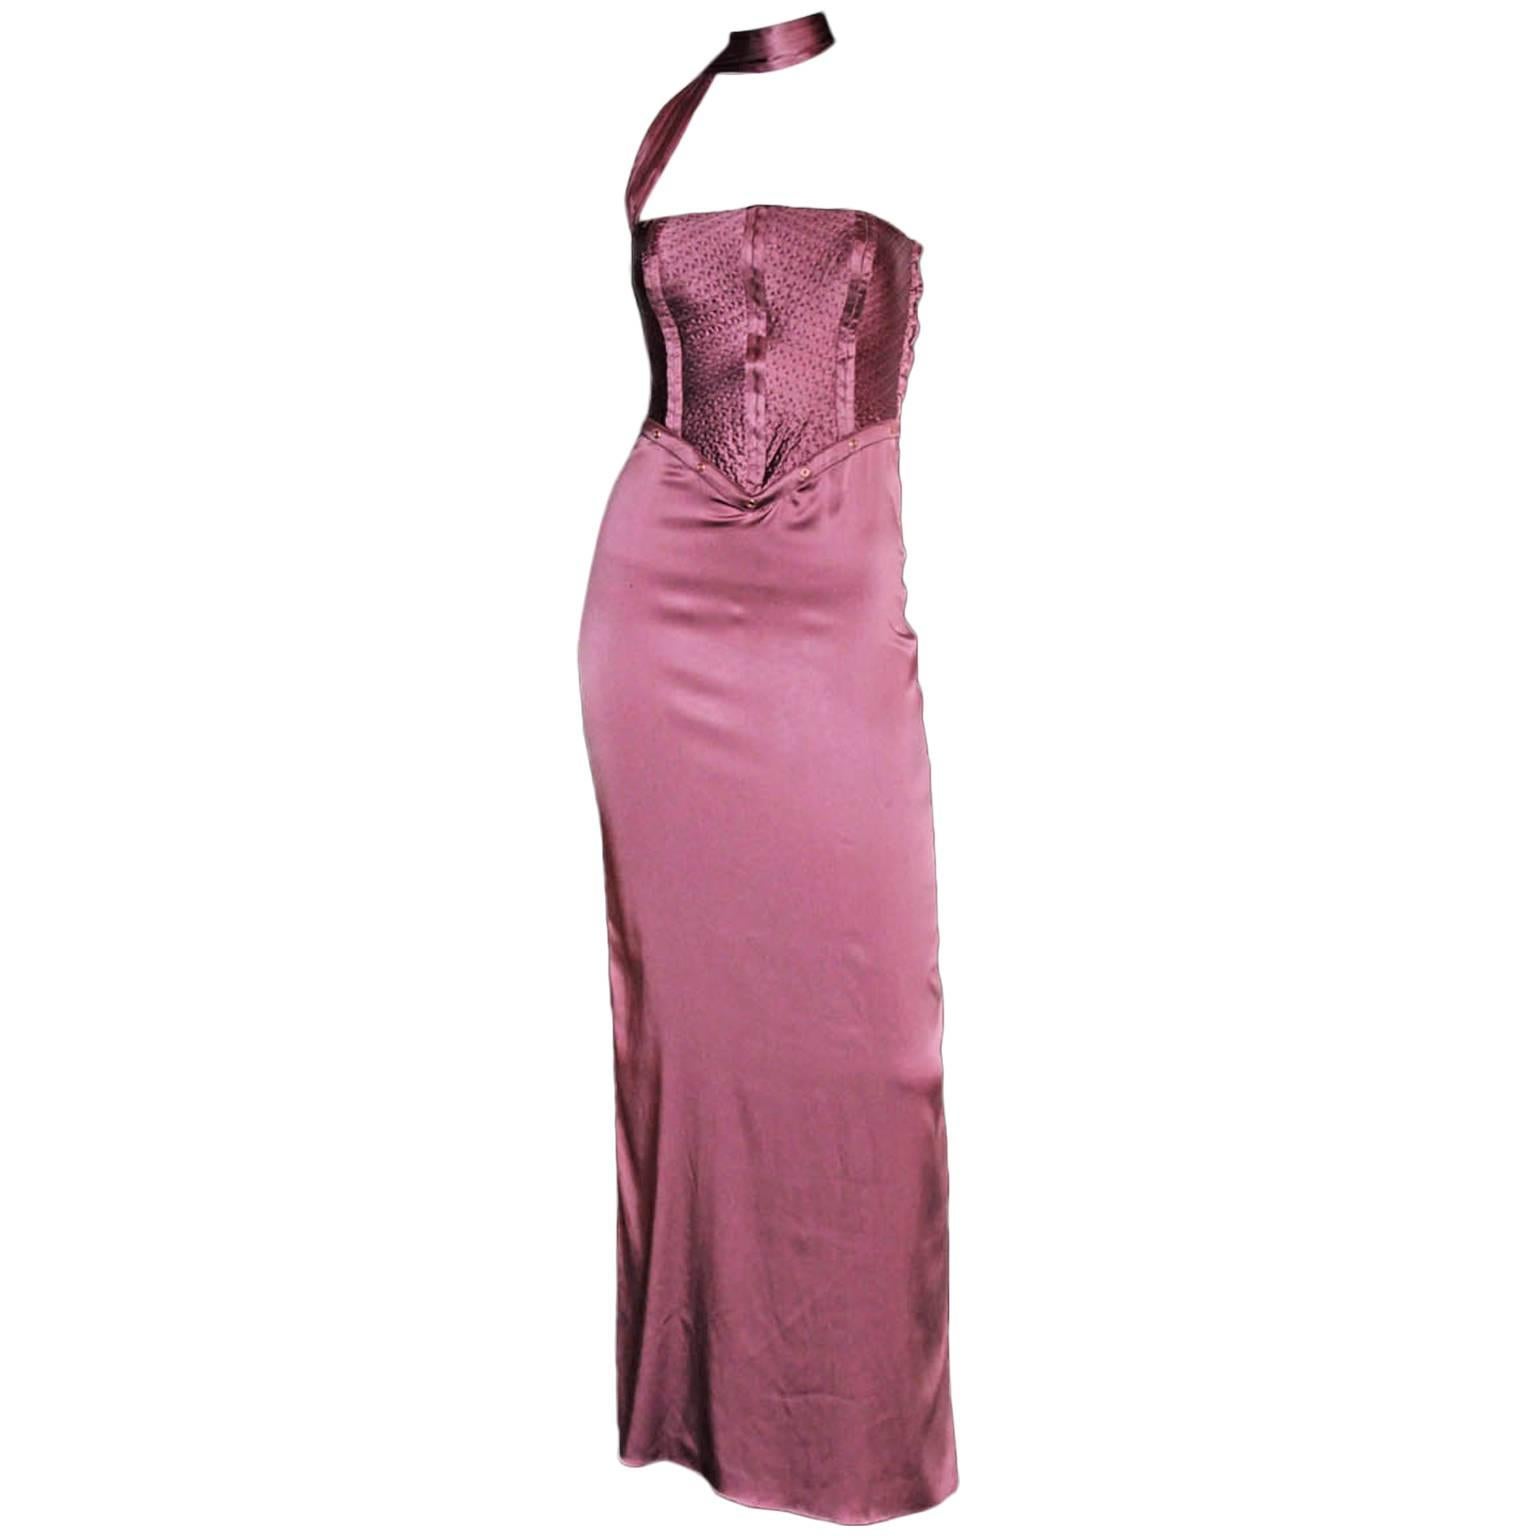 Free Shipping: Iconic Tom Ford Gucci FW 2003 Rose Silk Runway Corset Gown! 44